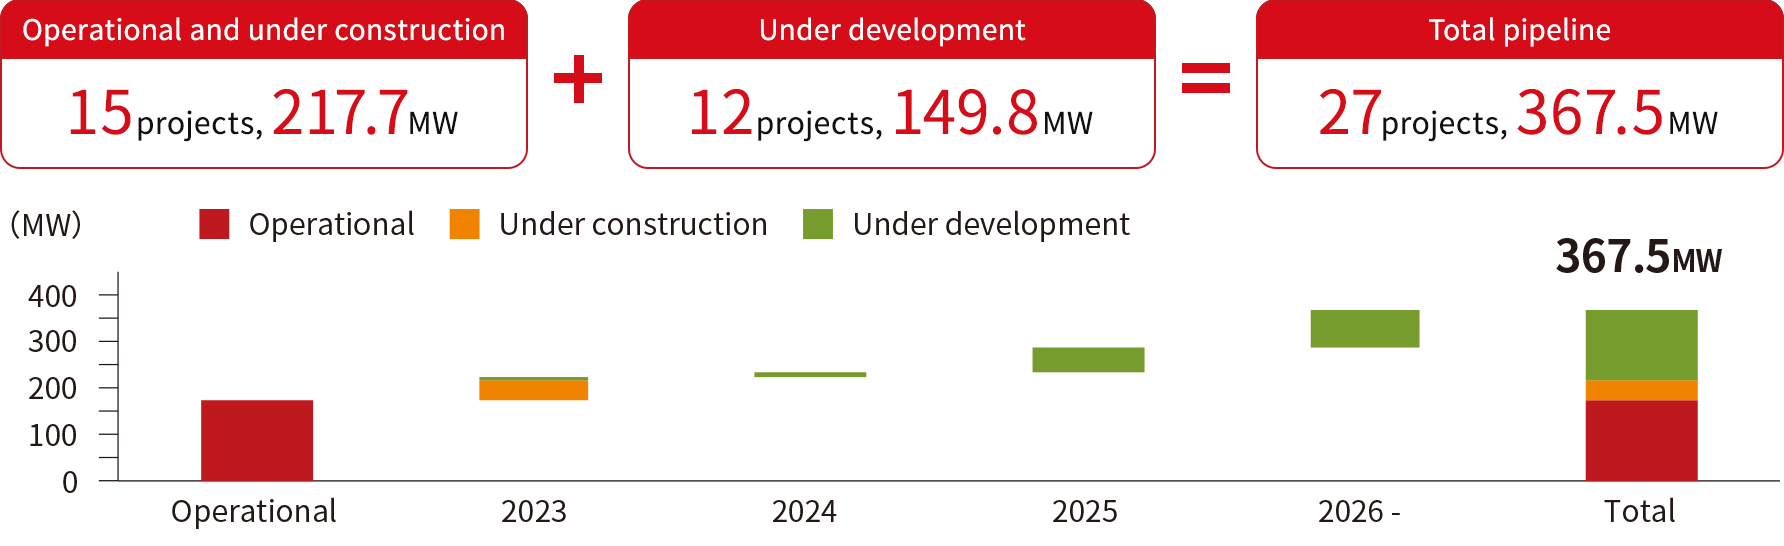 Operational and under construction 15projects, 217.7MW + Under development 12projects, 149.8MW = Total pipeline 27projects, 367.5MW